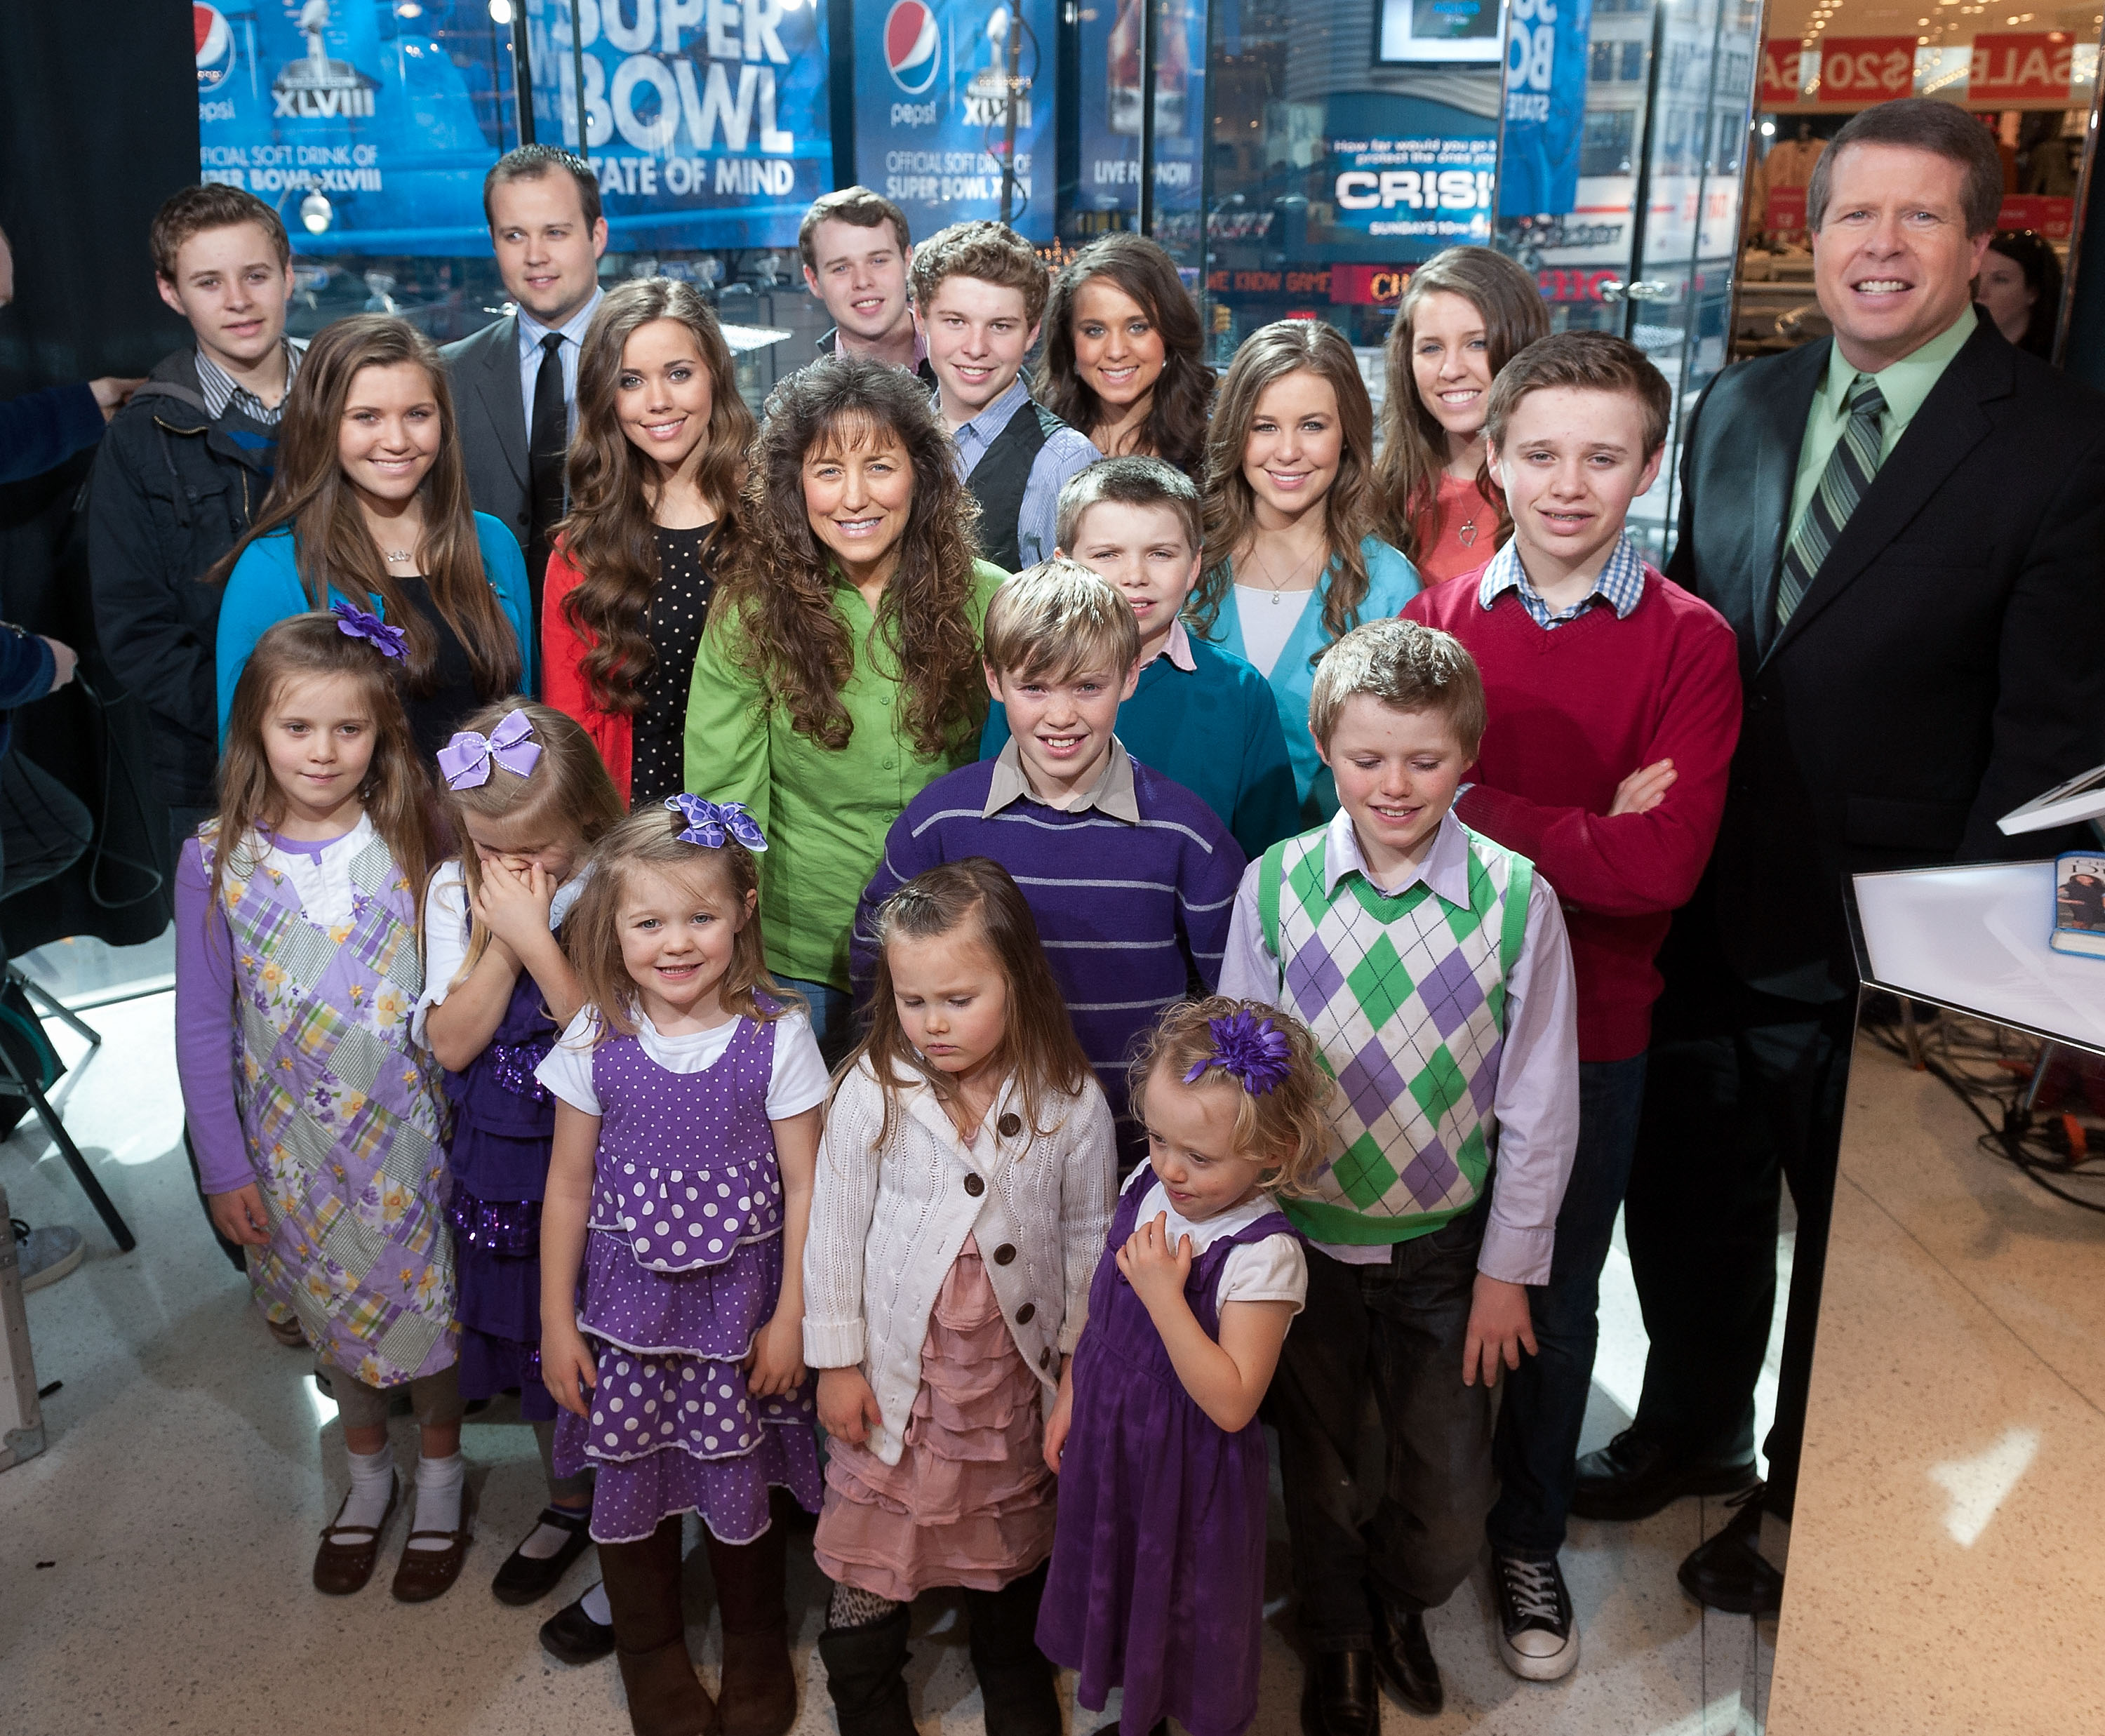 The Duggar family visits 'Extra' in 2014.